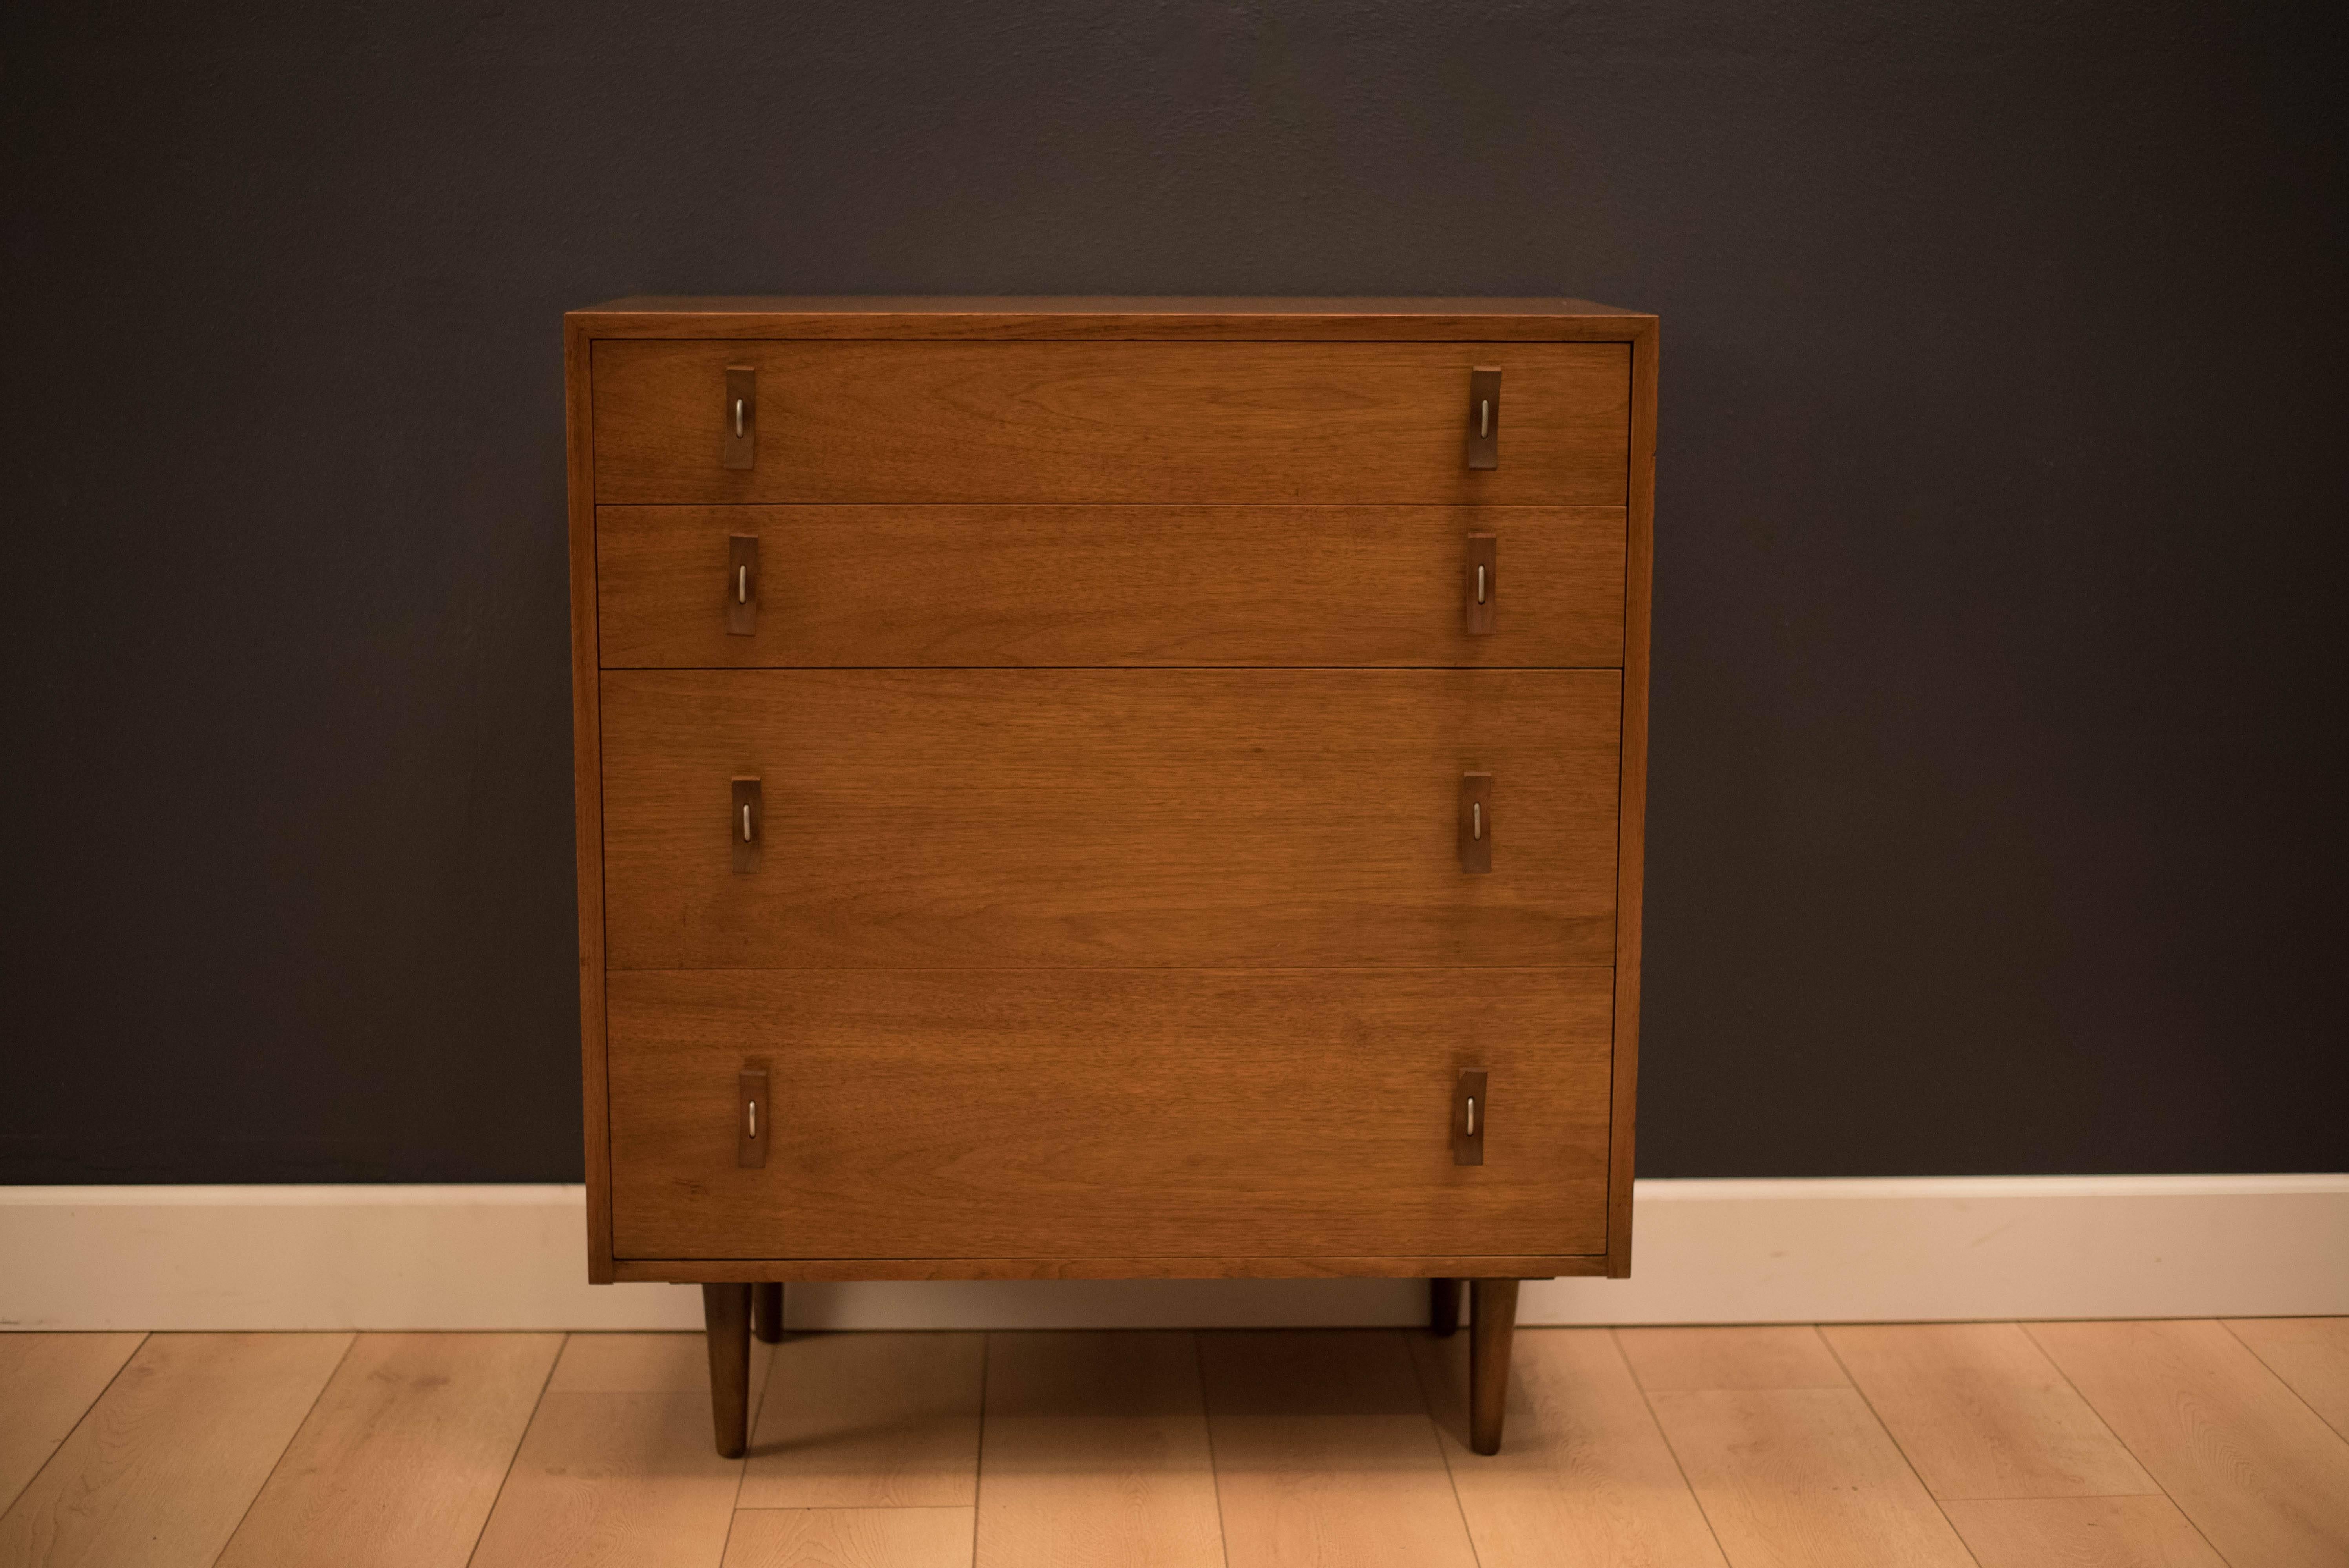 Mid-Century Modern Stanley Young dresser for Glenn of California in walnut. This chest features four drawers that provide ample storage space. Drawers are accessorized by the designer's signature walnut and bent metal pulls. Case piece displays